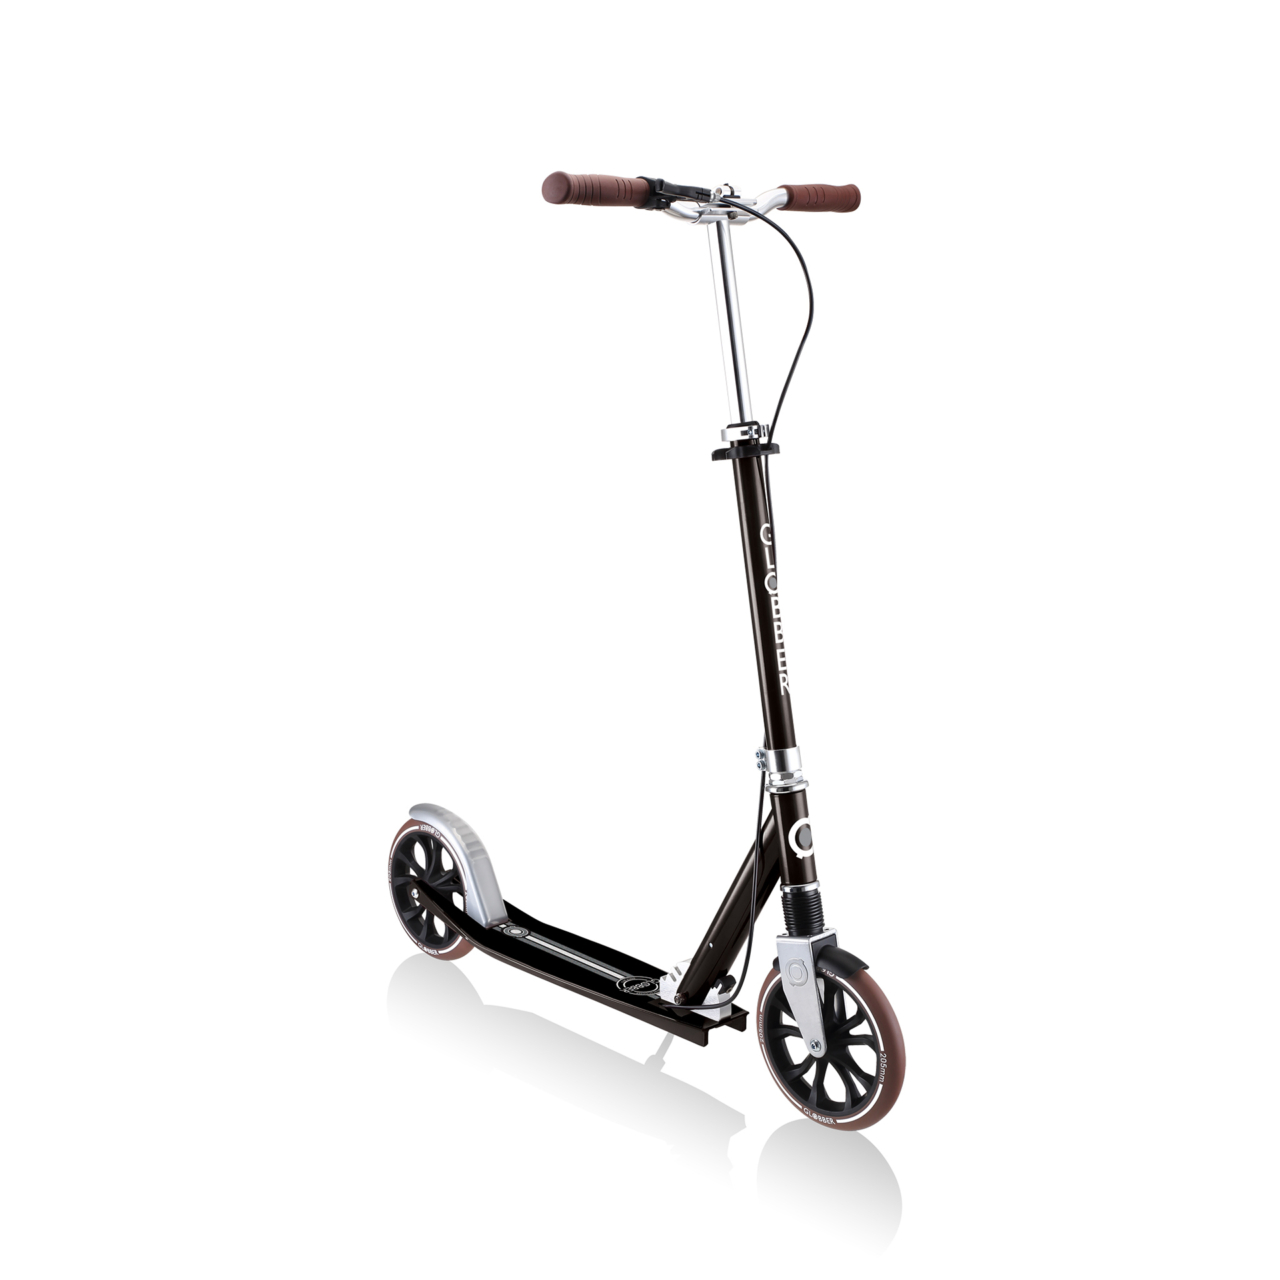 685 120 Big Wheel Scooter For Kids And Teens